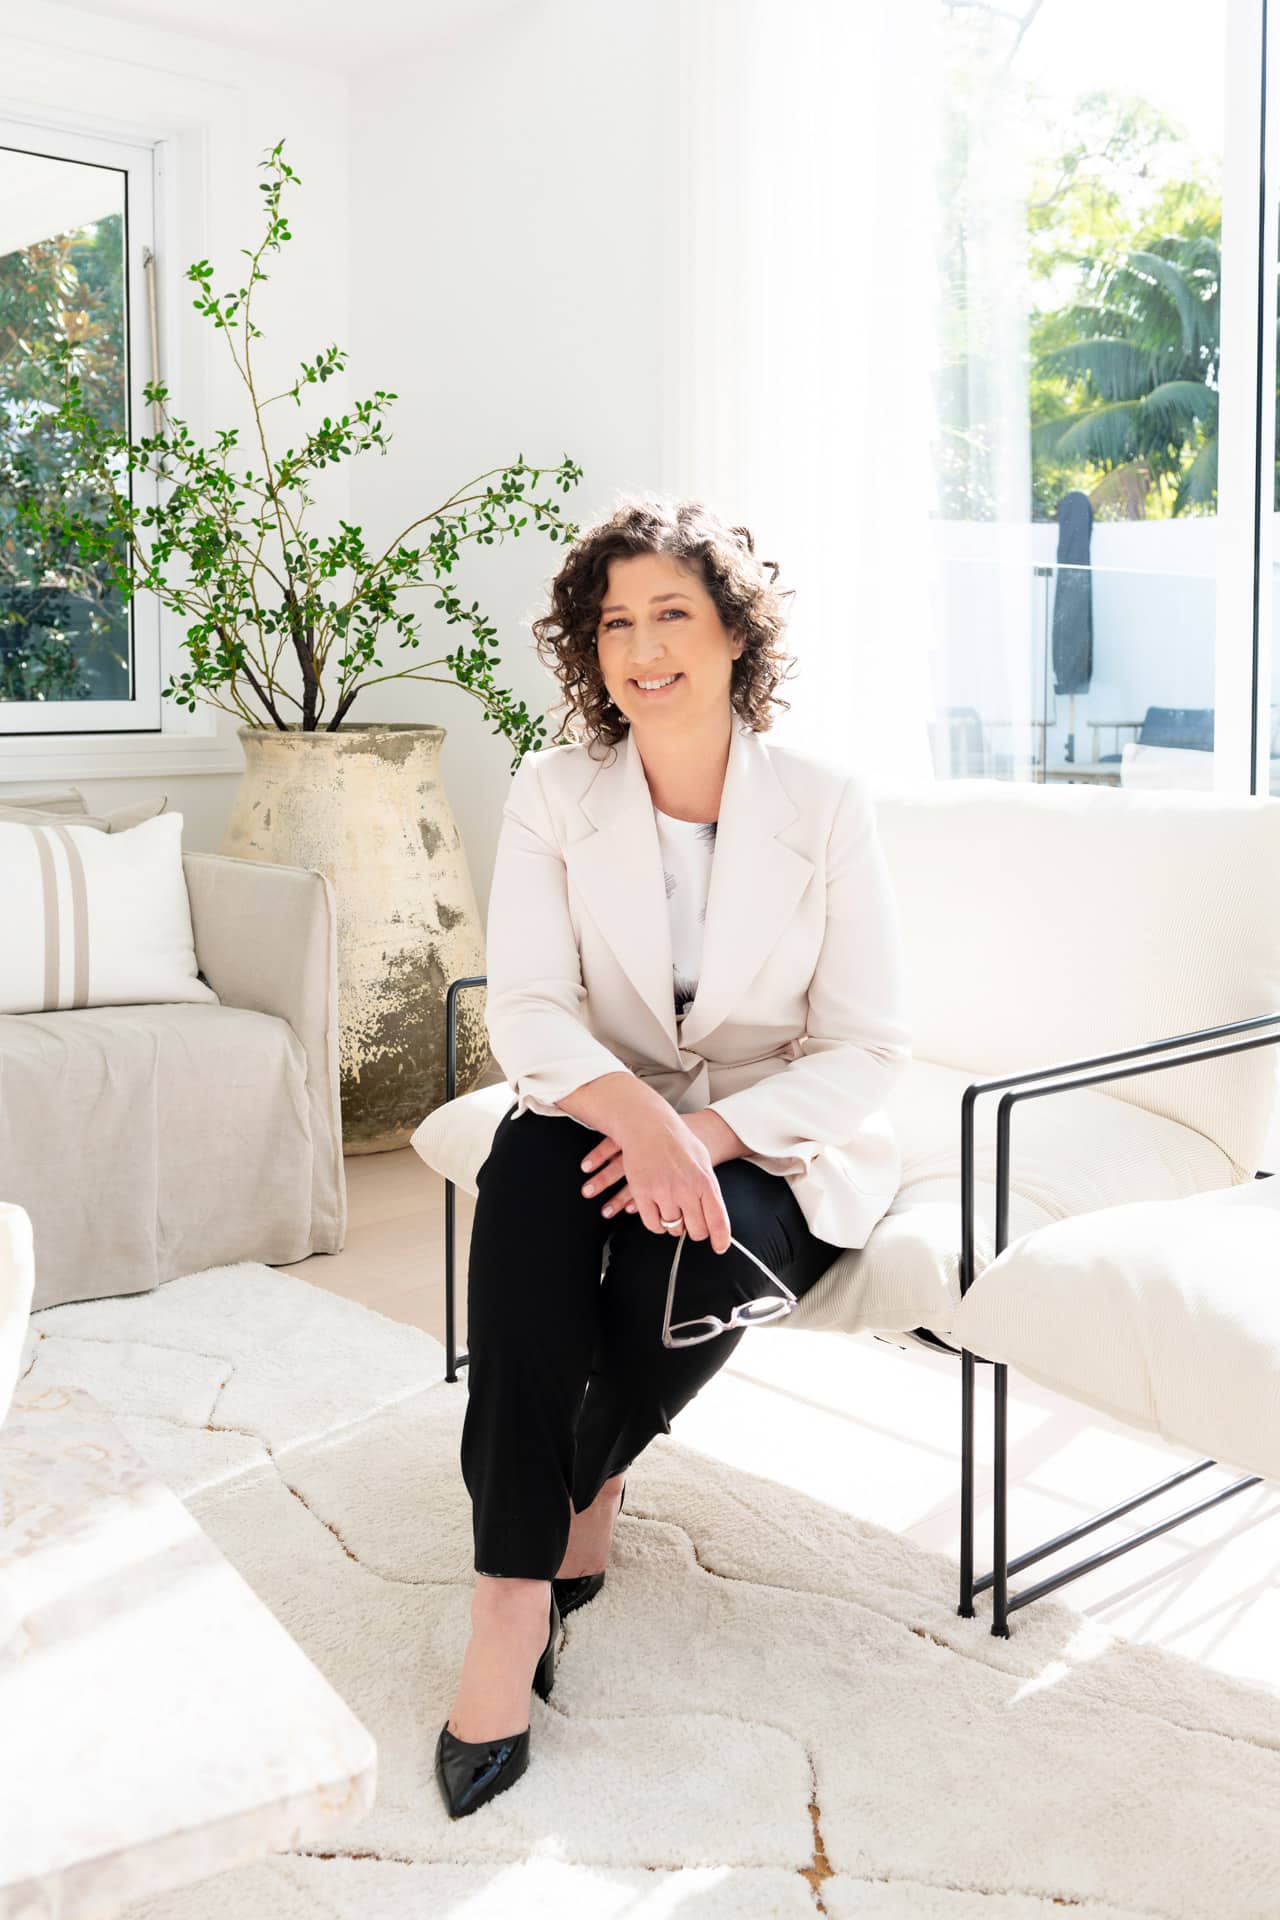 Marnie Cooper sits on an off-white sofa in a sunlit room in Sydney, holding her glasses. She wears a light blazer and dark pants, with a large plant in the background—a tranquil setting perfect for meditation.